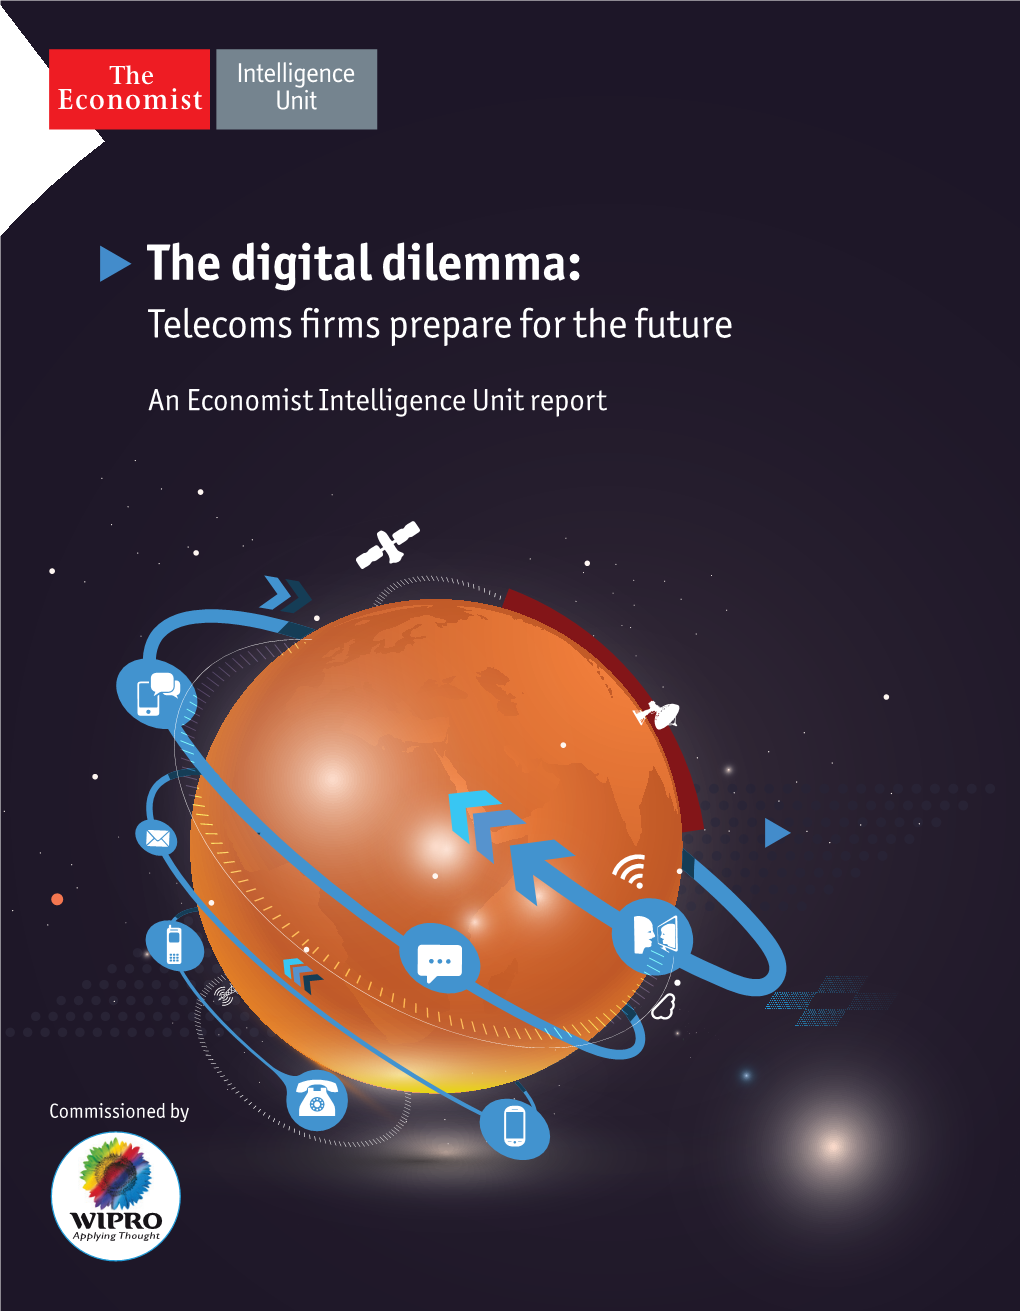 The Digital Dilemma: Telecoms Firms Prepare for the Future